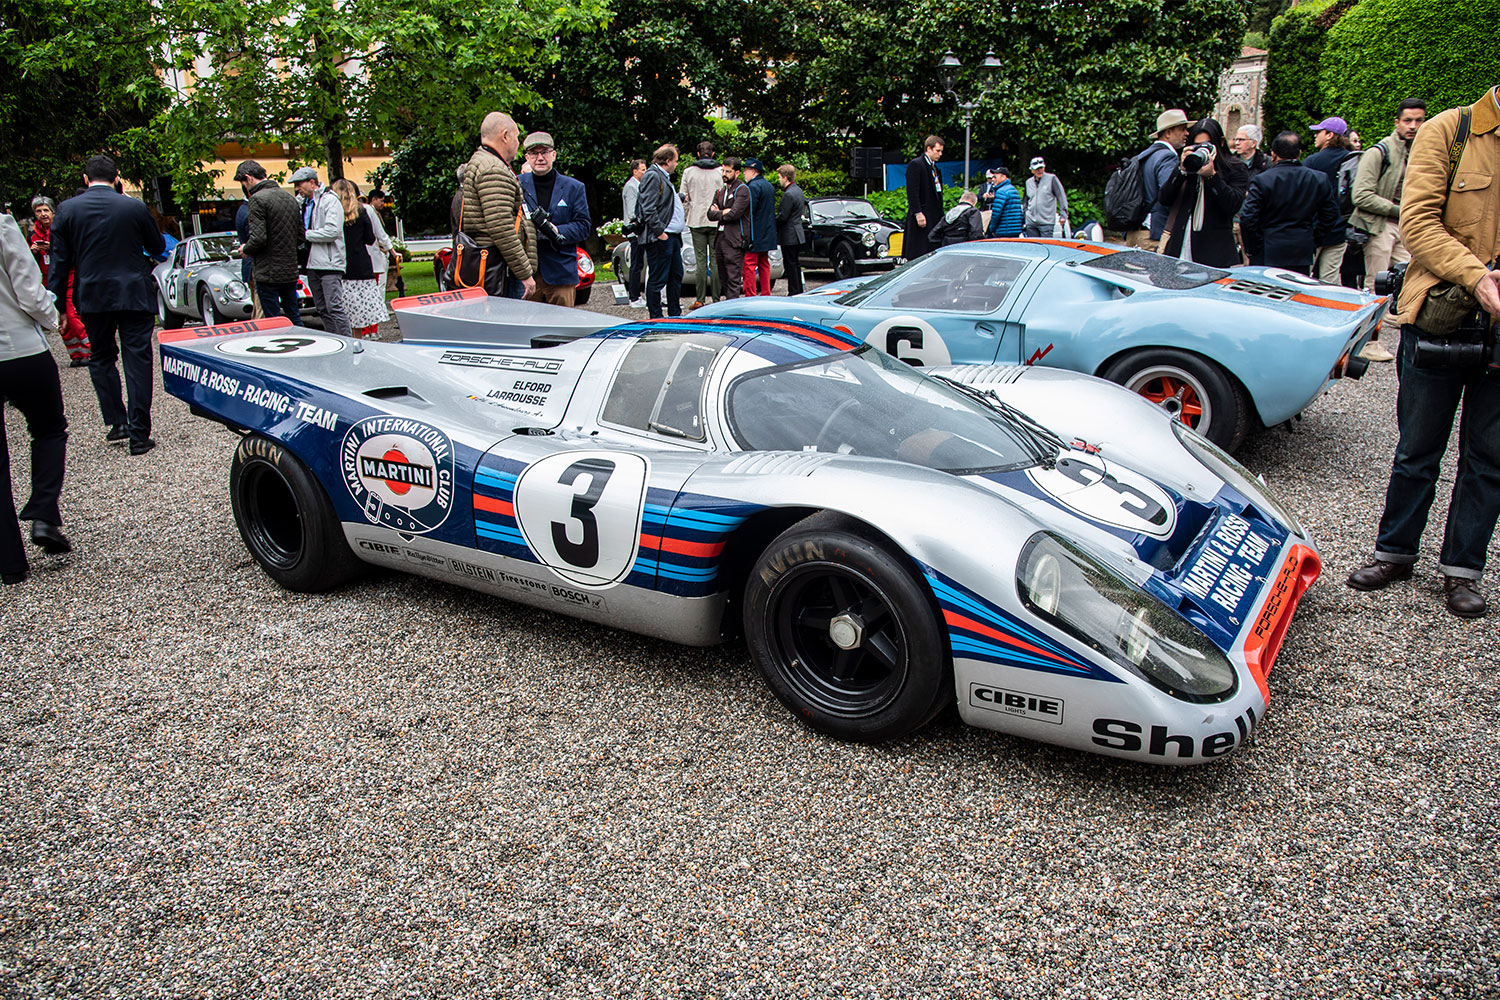 Porsche 917K with a Martini racing livery at Villa d'Este concours in 2023